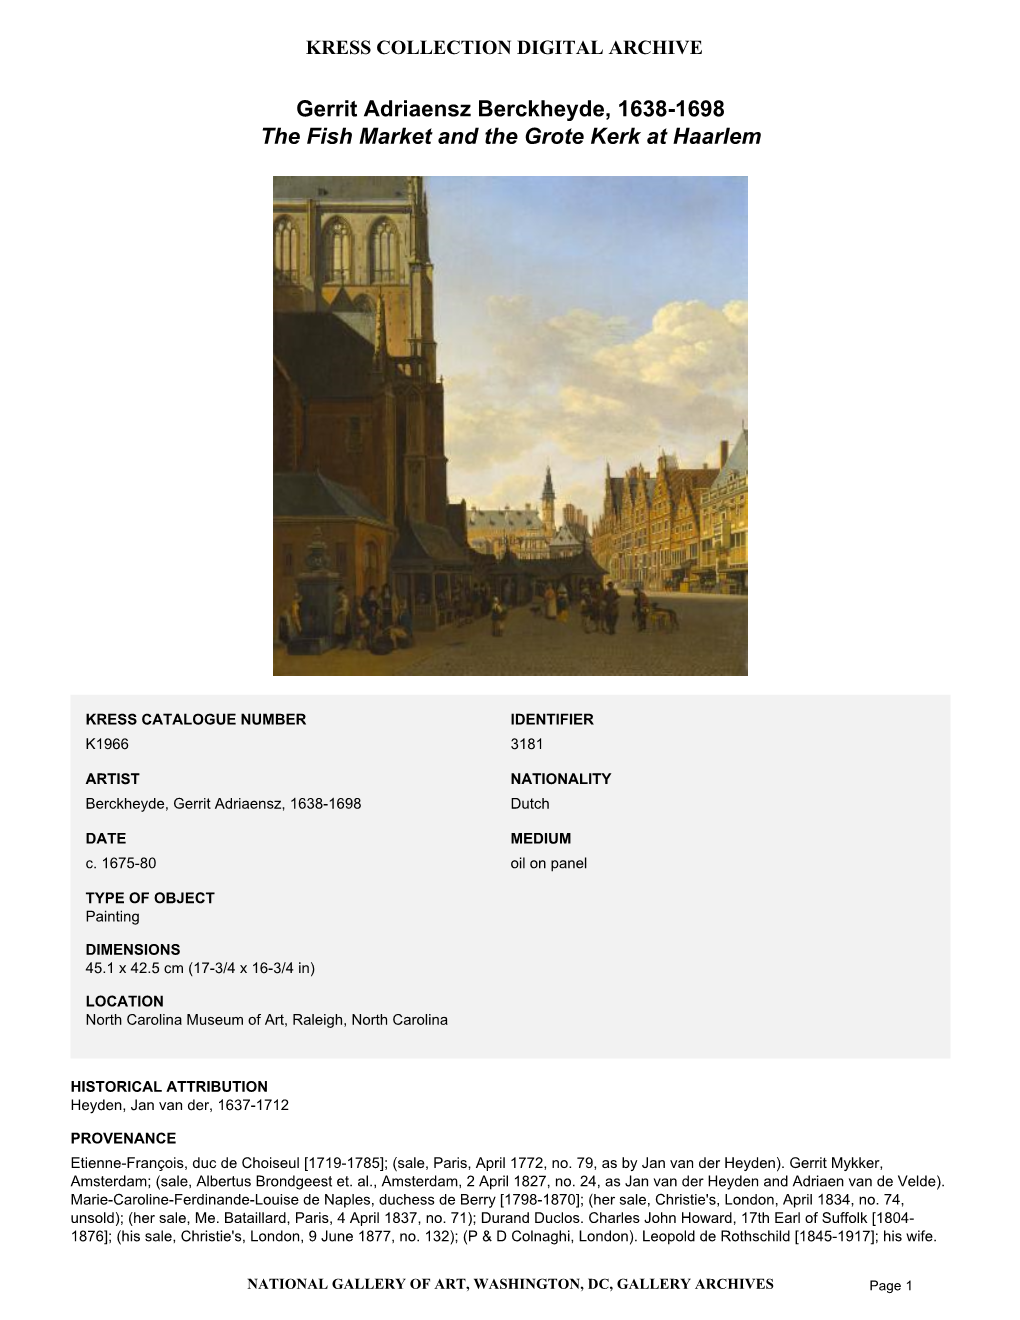 Summary for the Fish Market and the Grote Kerk at Haarlem